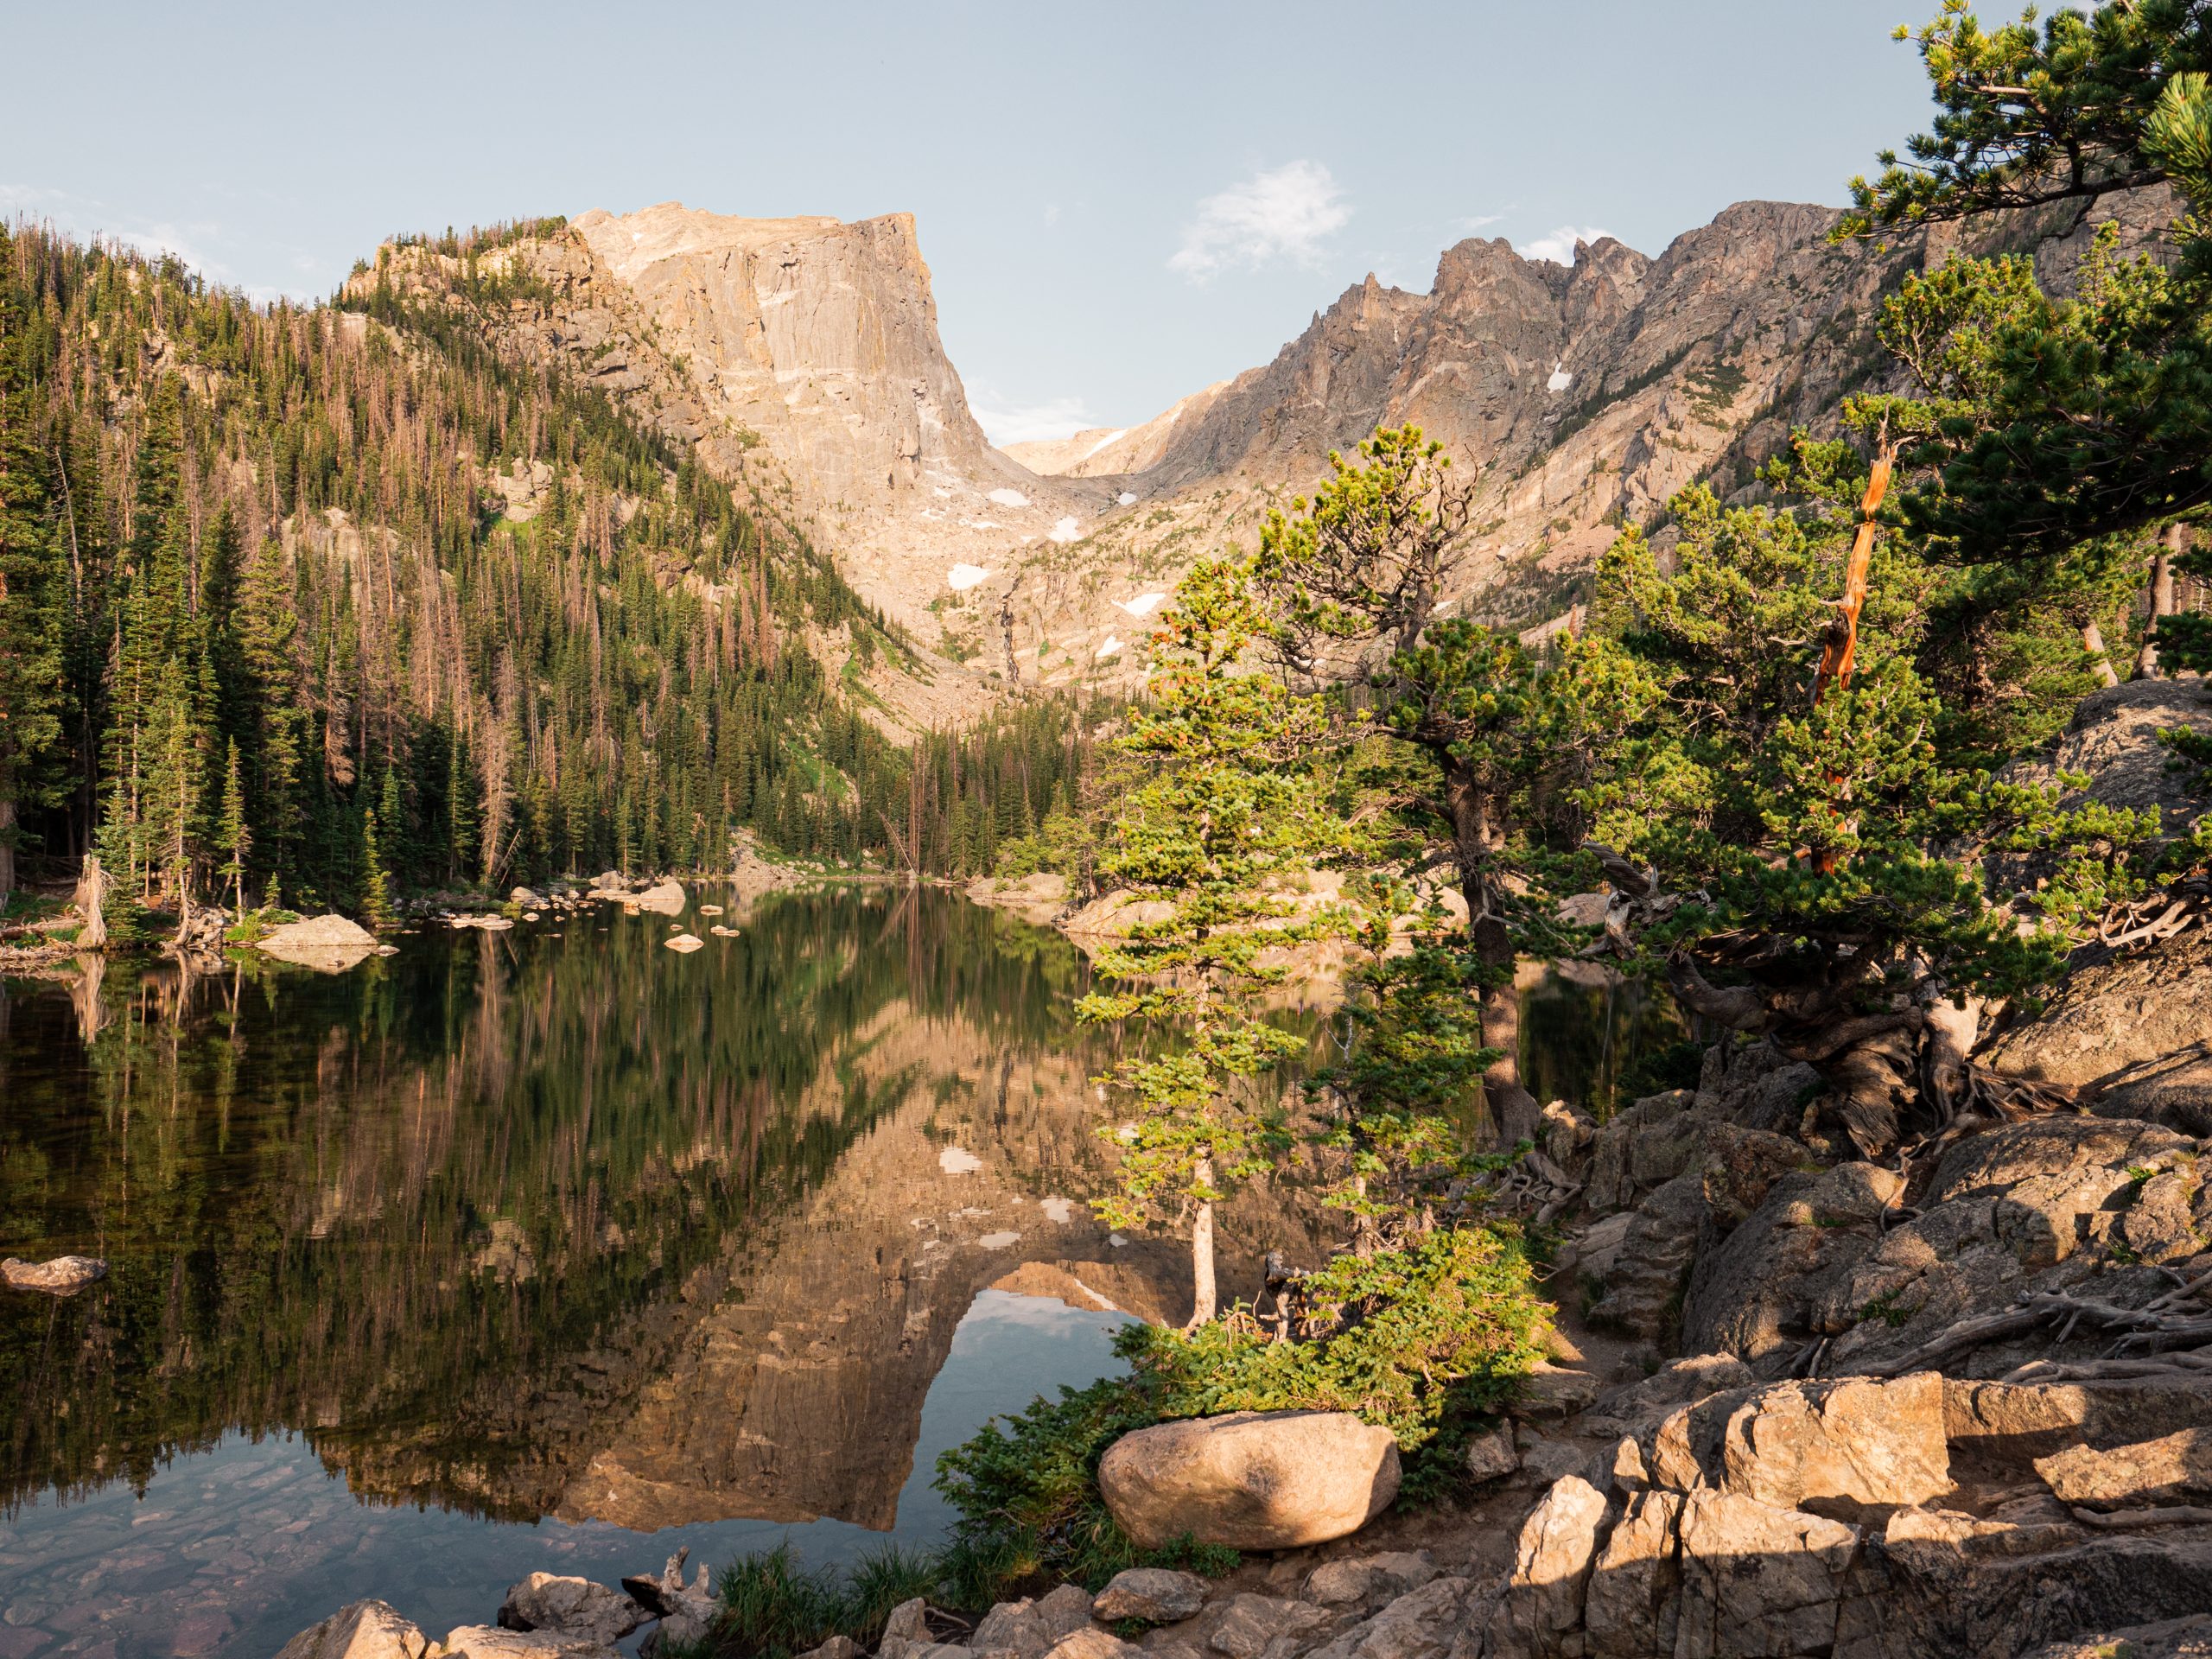 Dream Lake and the reflection of the mountains in the lake in Rocky Mountain National Park